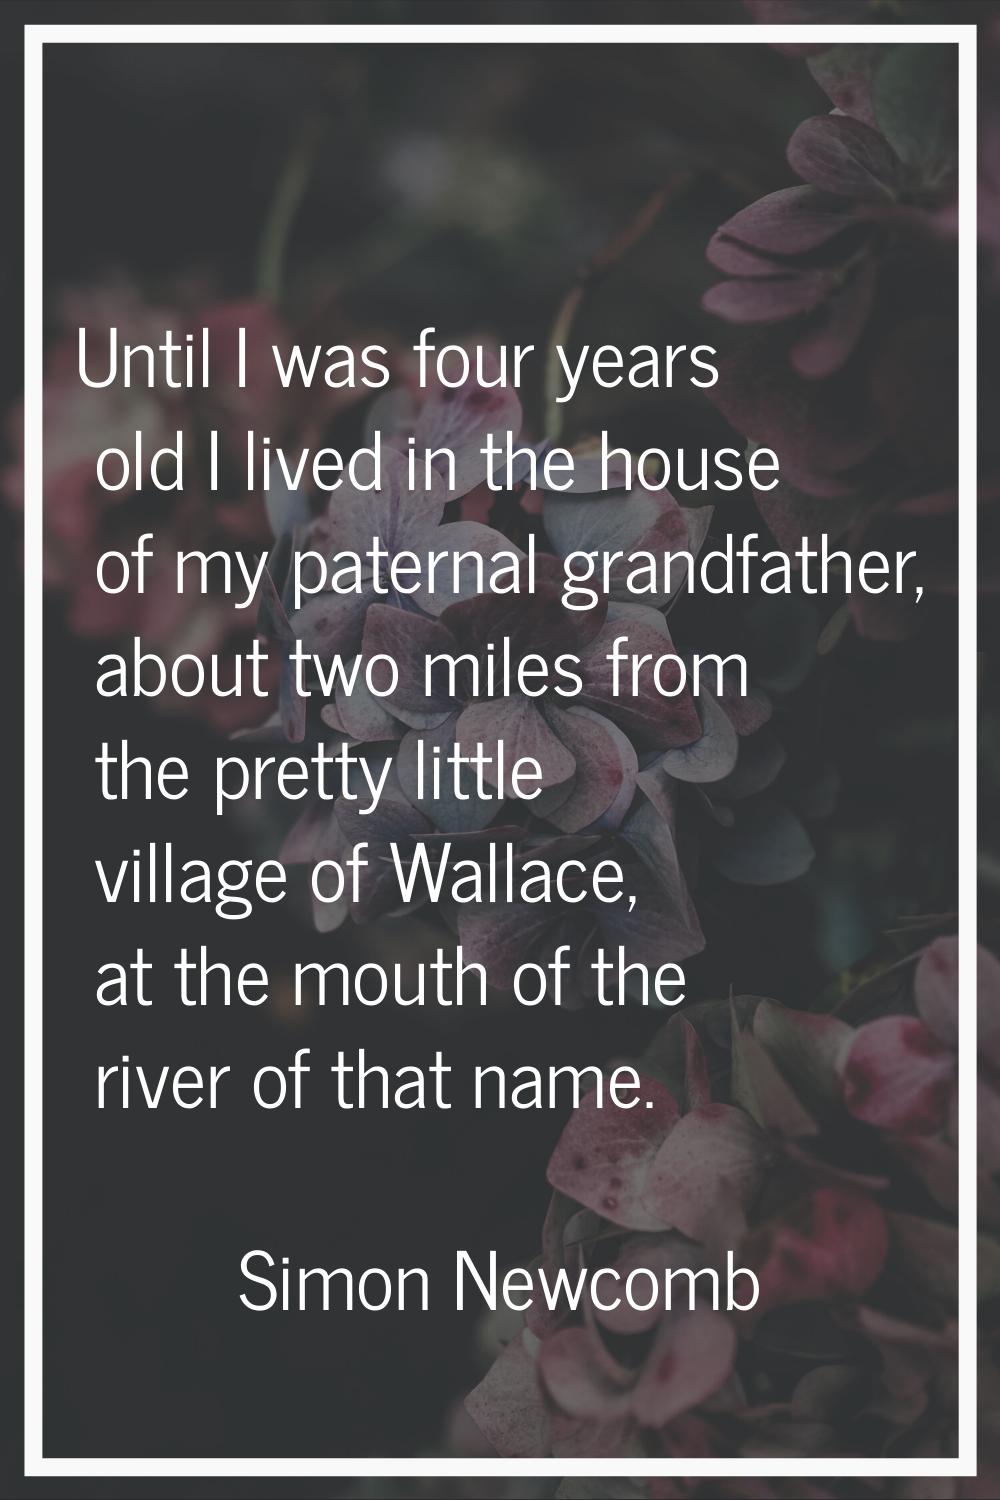 Until I was four years old I lived in the house of my paternal grandfather, about two miles from th